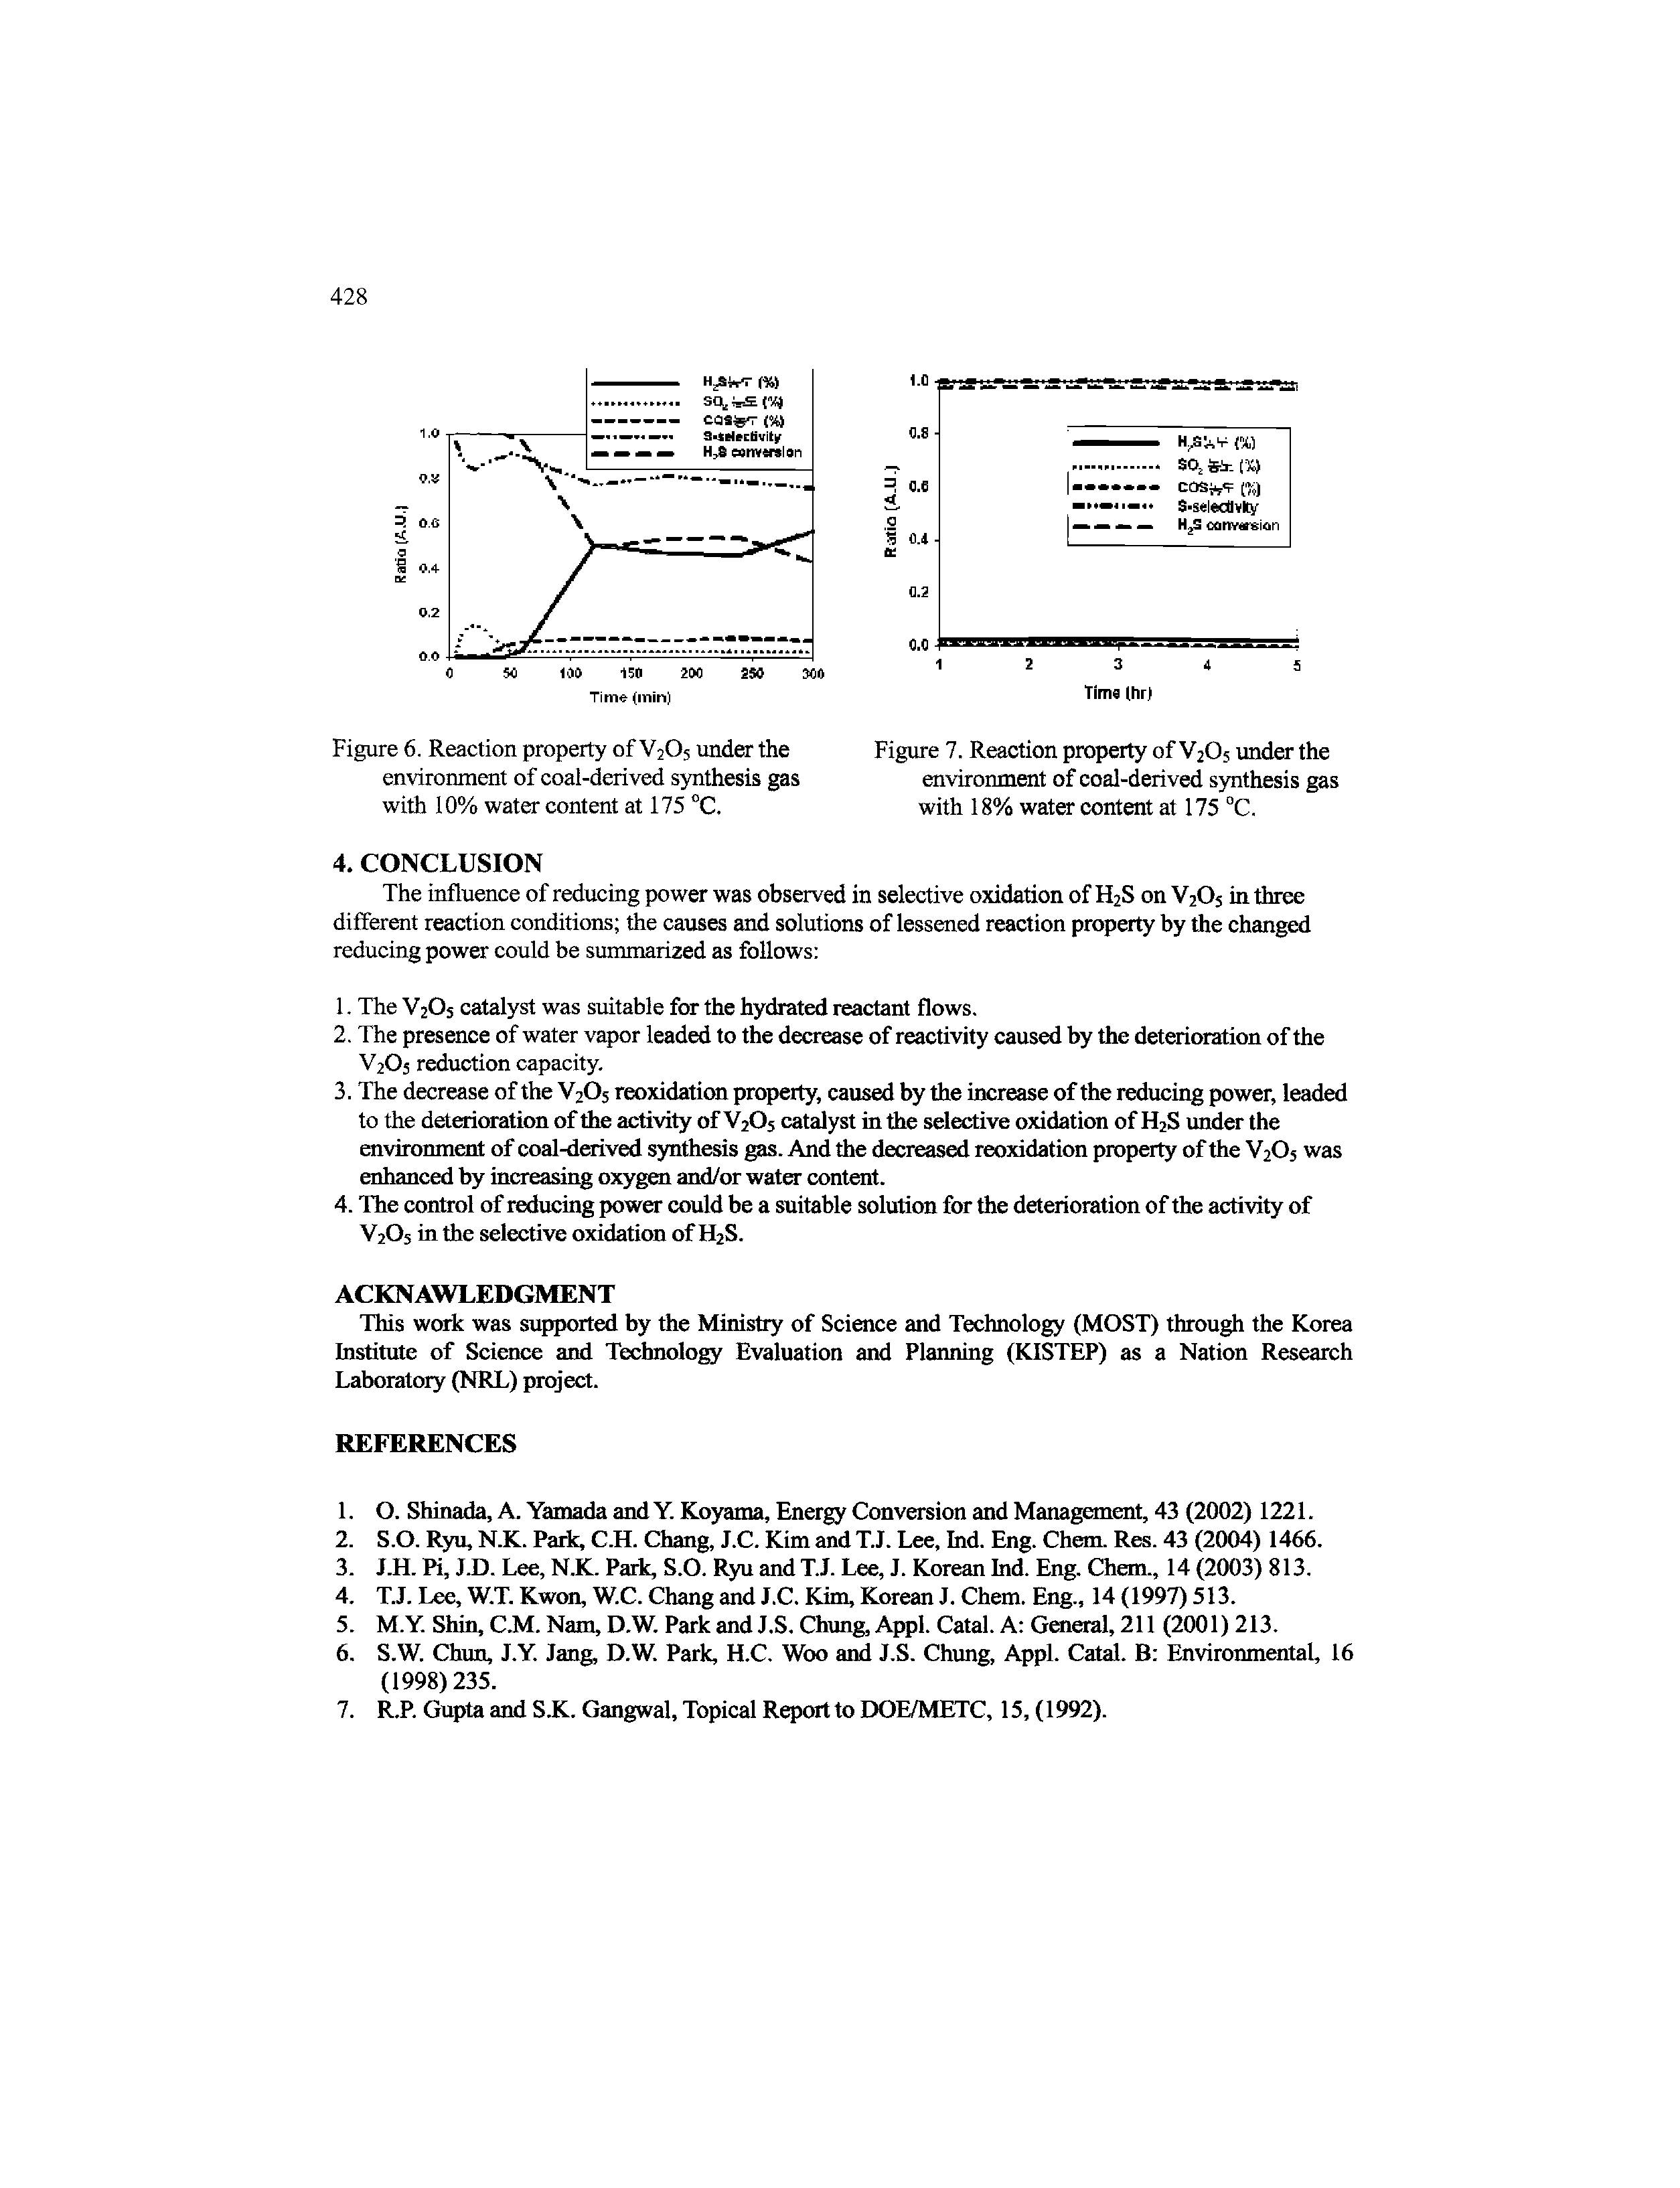 Figure 6. Reaction property of V2O5 under the environment of coal-derived synthesis gas with 10% water content at 175 °C.